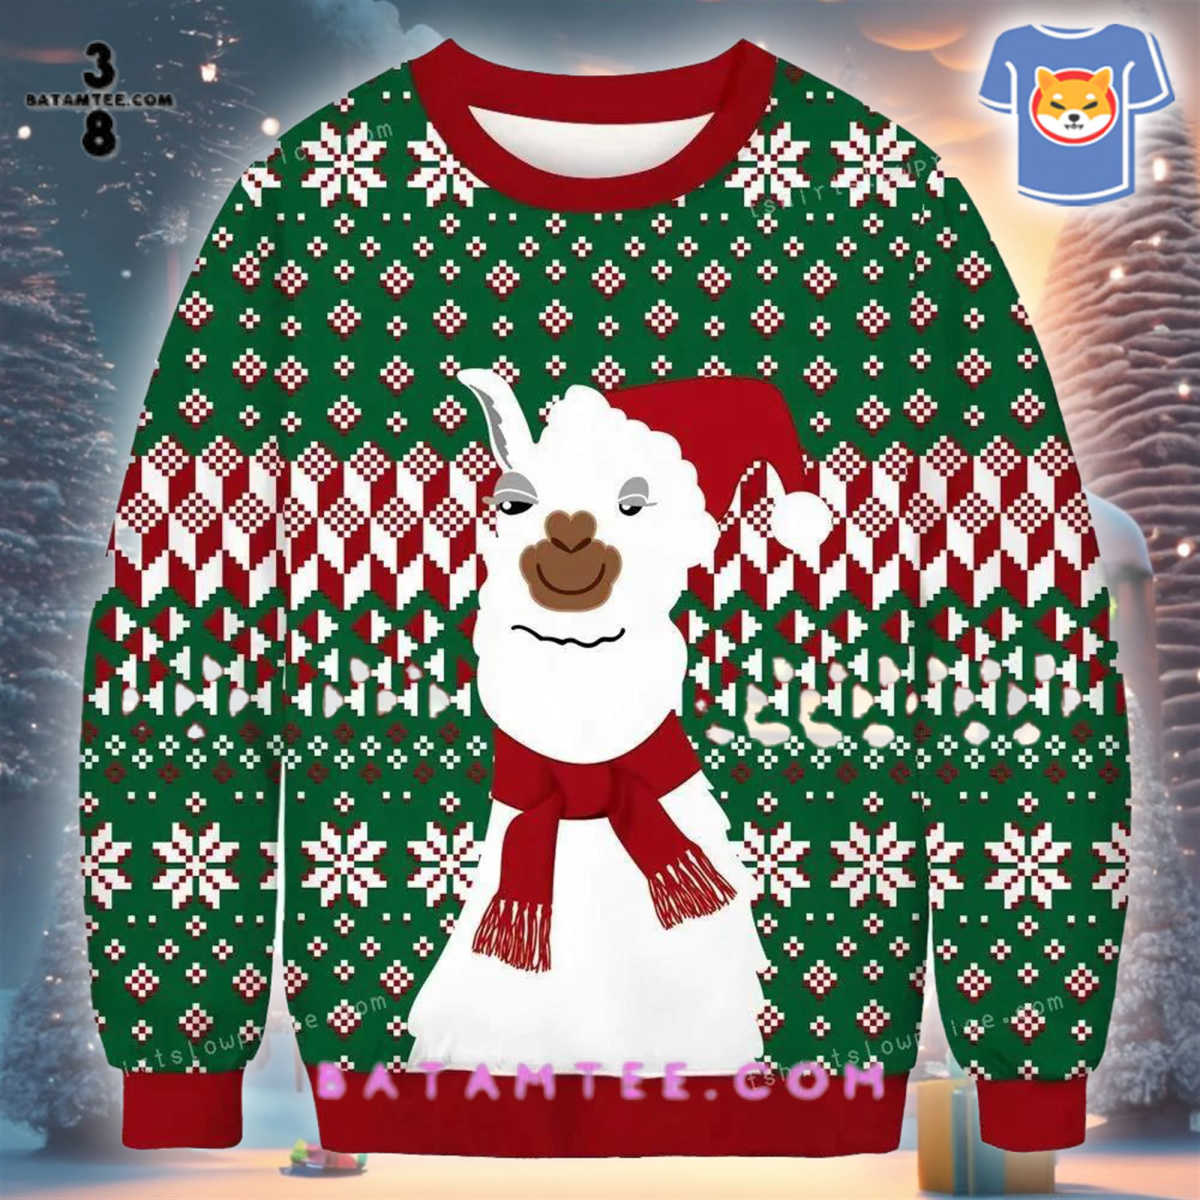 Xmas Alpaca Ugly Christmas Sweater Mens's Overview - Batamtee Shop - Threads & Totes: Your Style Destination